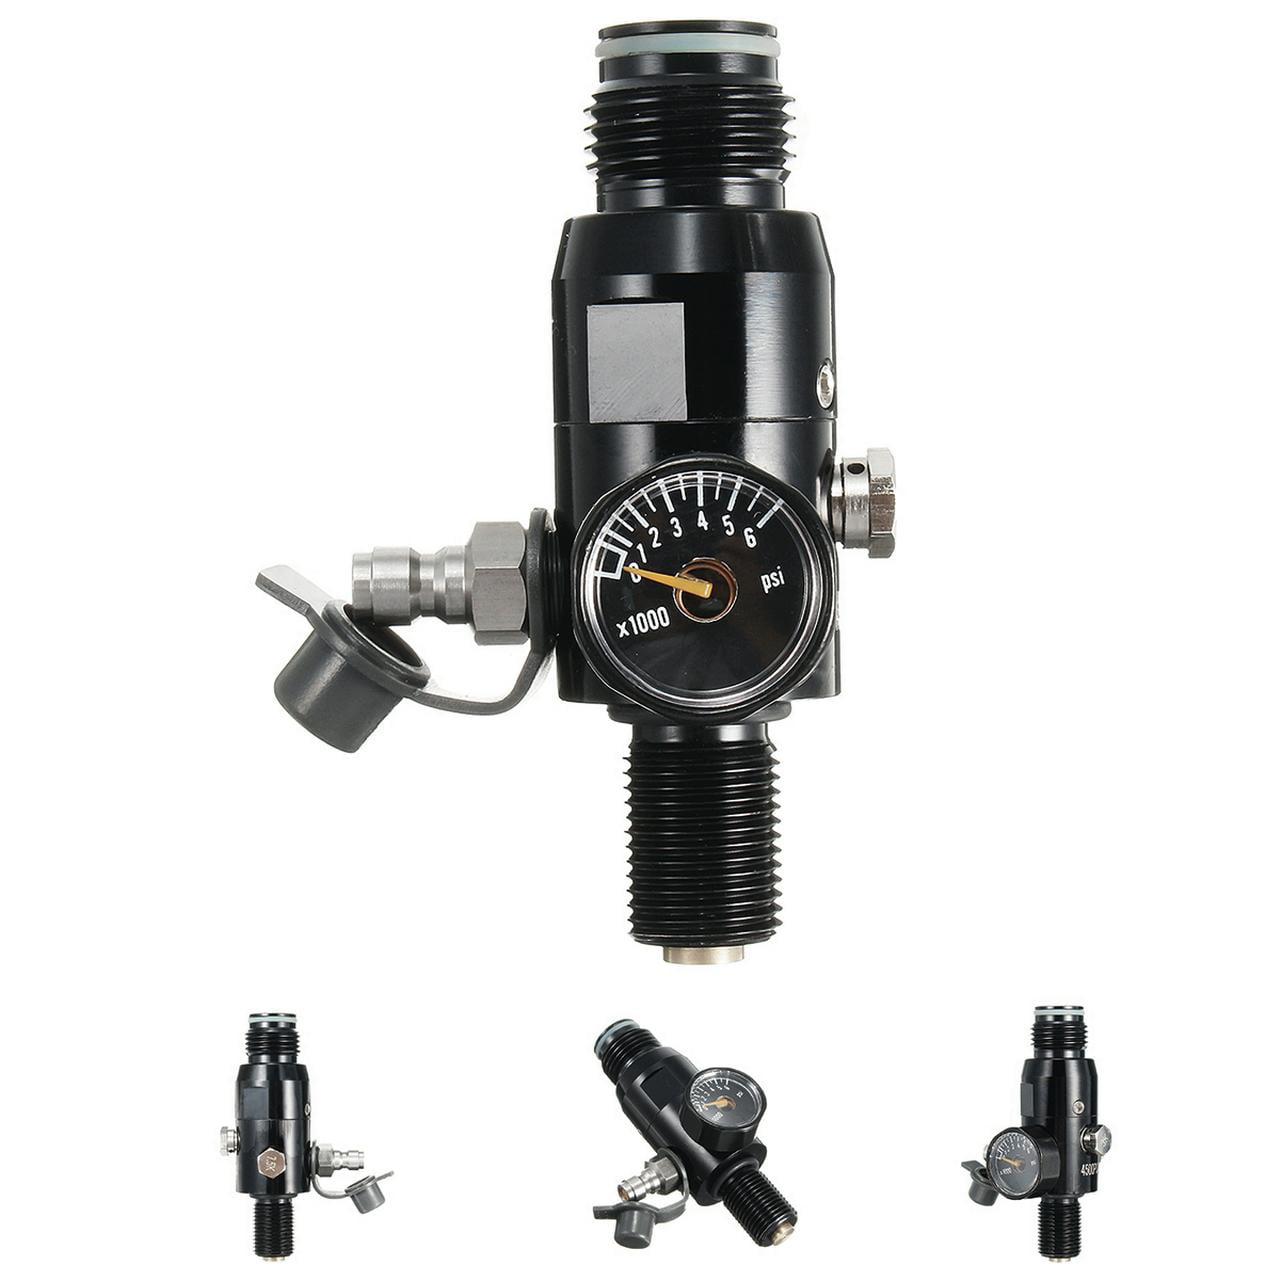 ZKS-KS 4500psi Paintball High Compressed Air Tank Regulator HPA Valve Output 2200psi Power Tool Accessories 